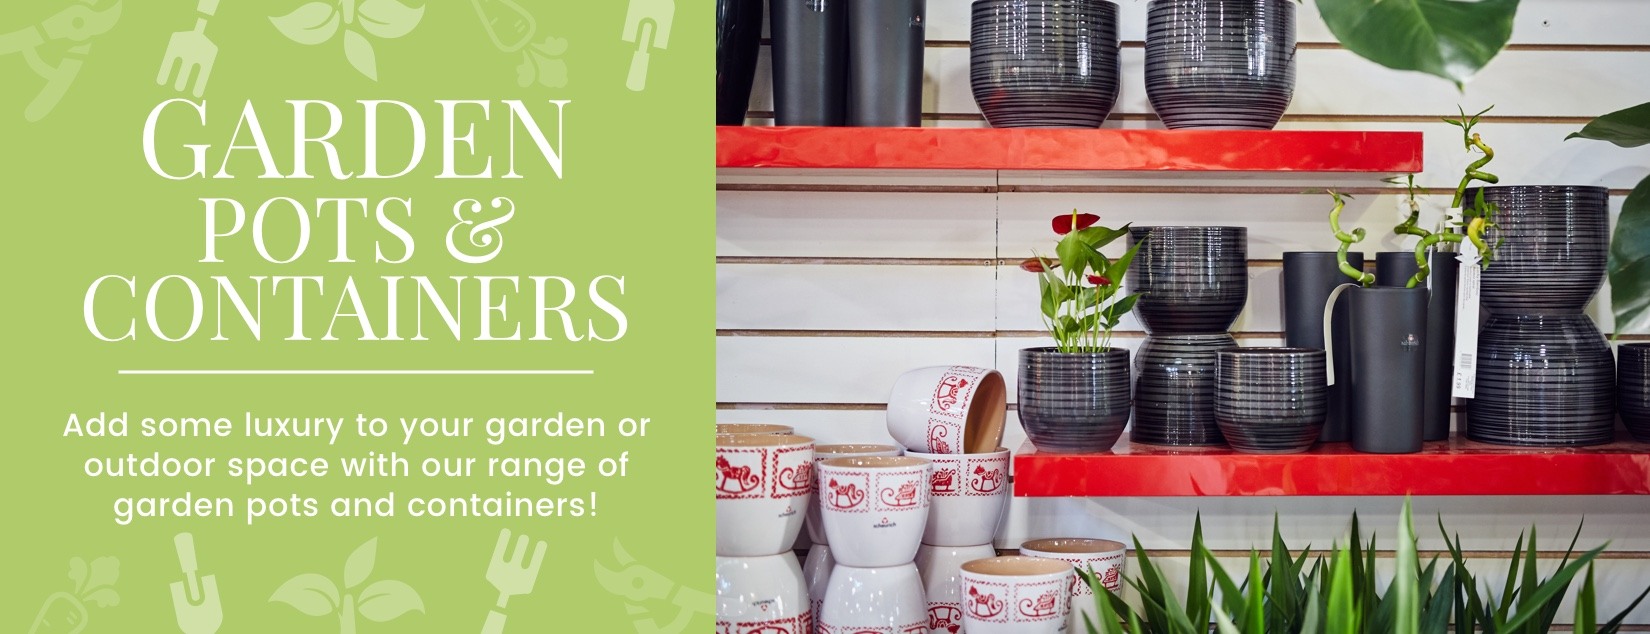 Garden Pots & Containers